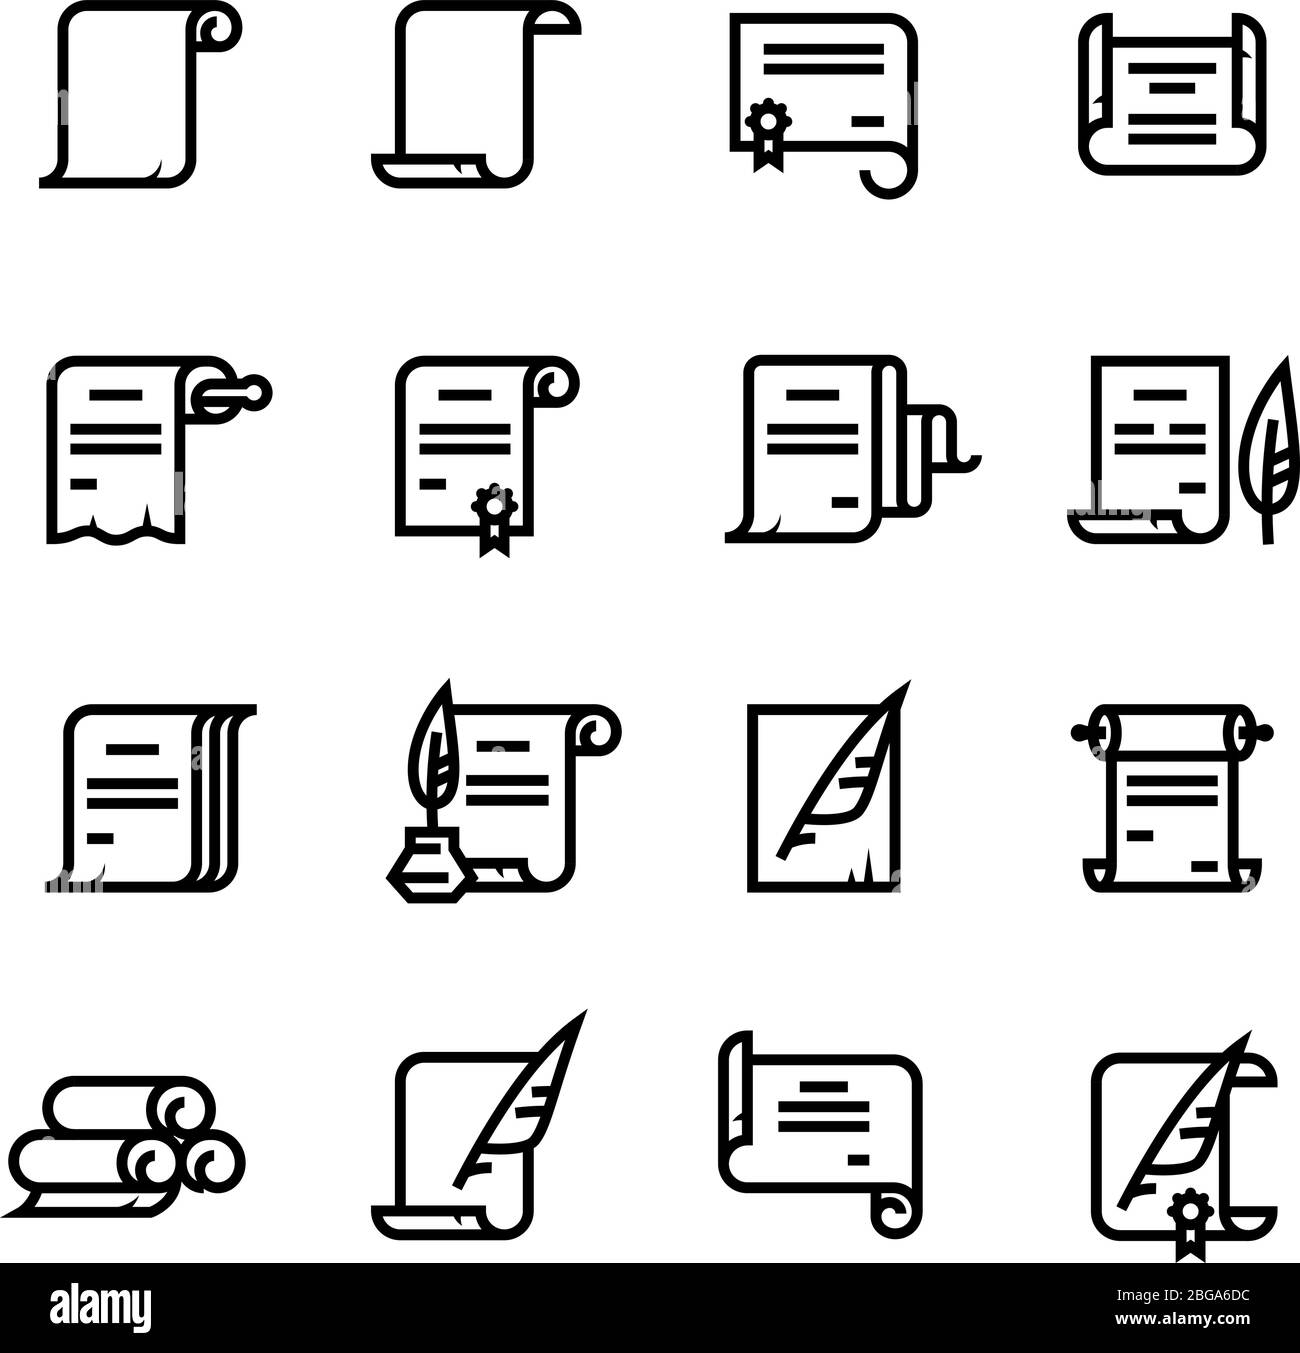 https://c8.alamy.com/comp/2BGA6DC/ancient-paper-scrolls-and-documents-vector-icons-simple-diploma-symbols-illustration-of-ancient-document-certificate-paper-linear-diploma-scroll-2BGA6DC.jpg